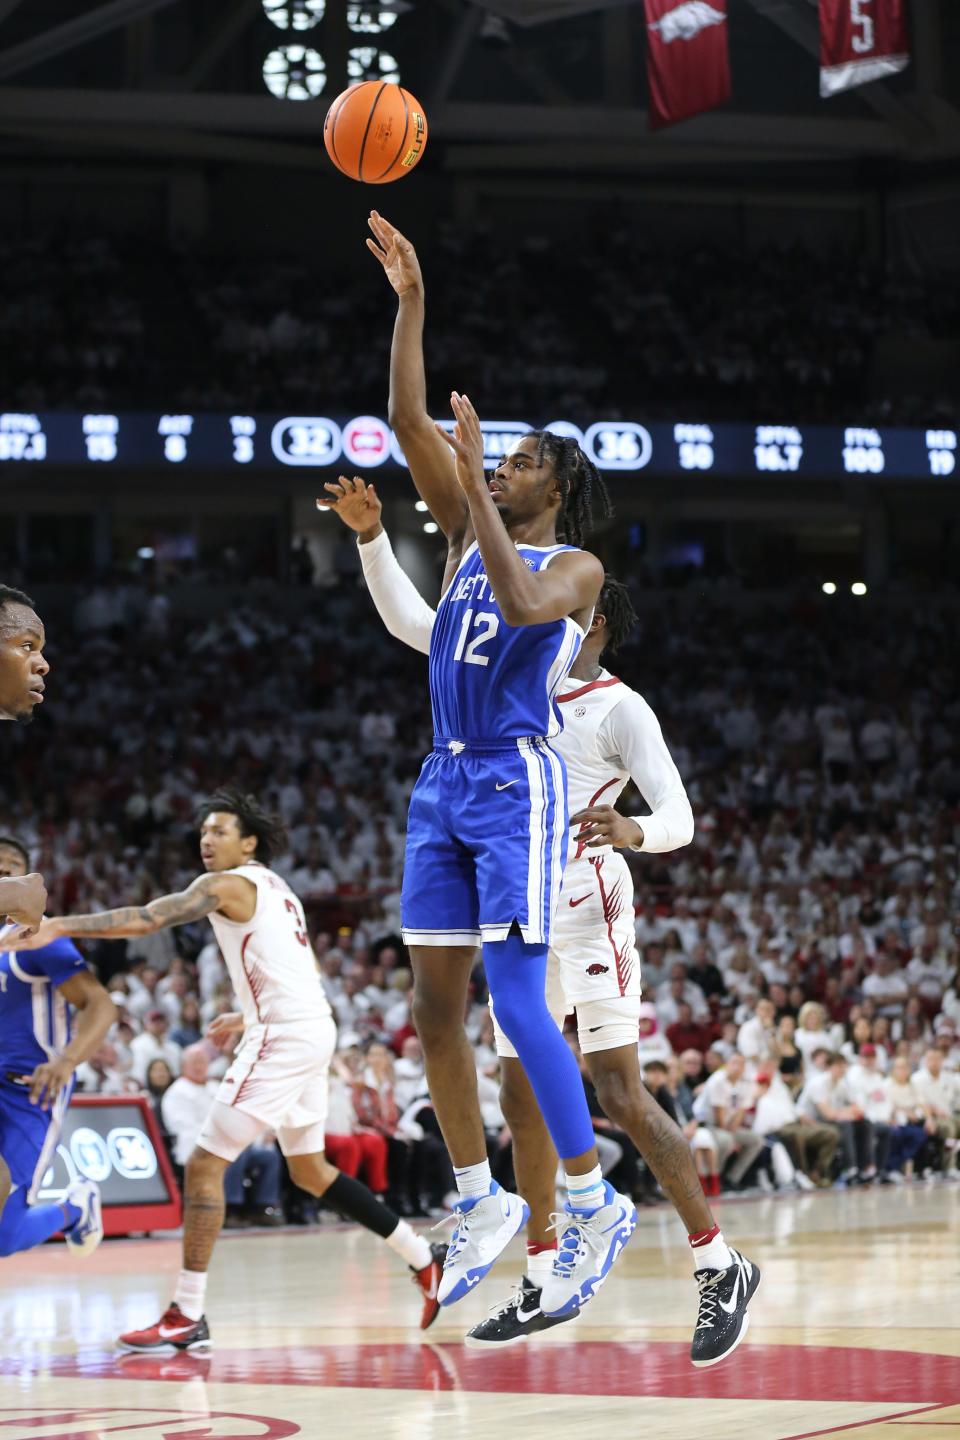 Mar 4, 2023; Fayetteville, Arkansas, USA; Kentucky Wildcats guard Antonio Reeves (12) shoots the ball against the Arkansas Razorbacks in the first half at Bud Walton Arena. Mandatory Credit: Nelson Chenault-USA TODAY Sports